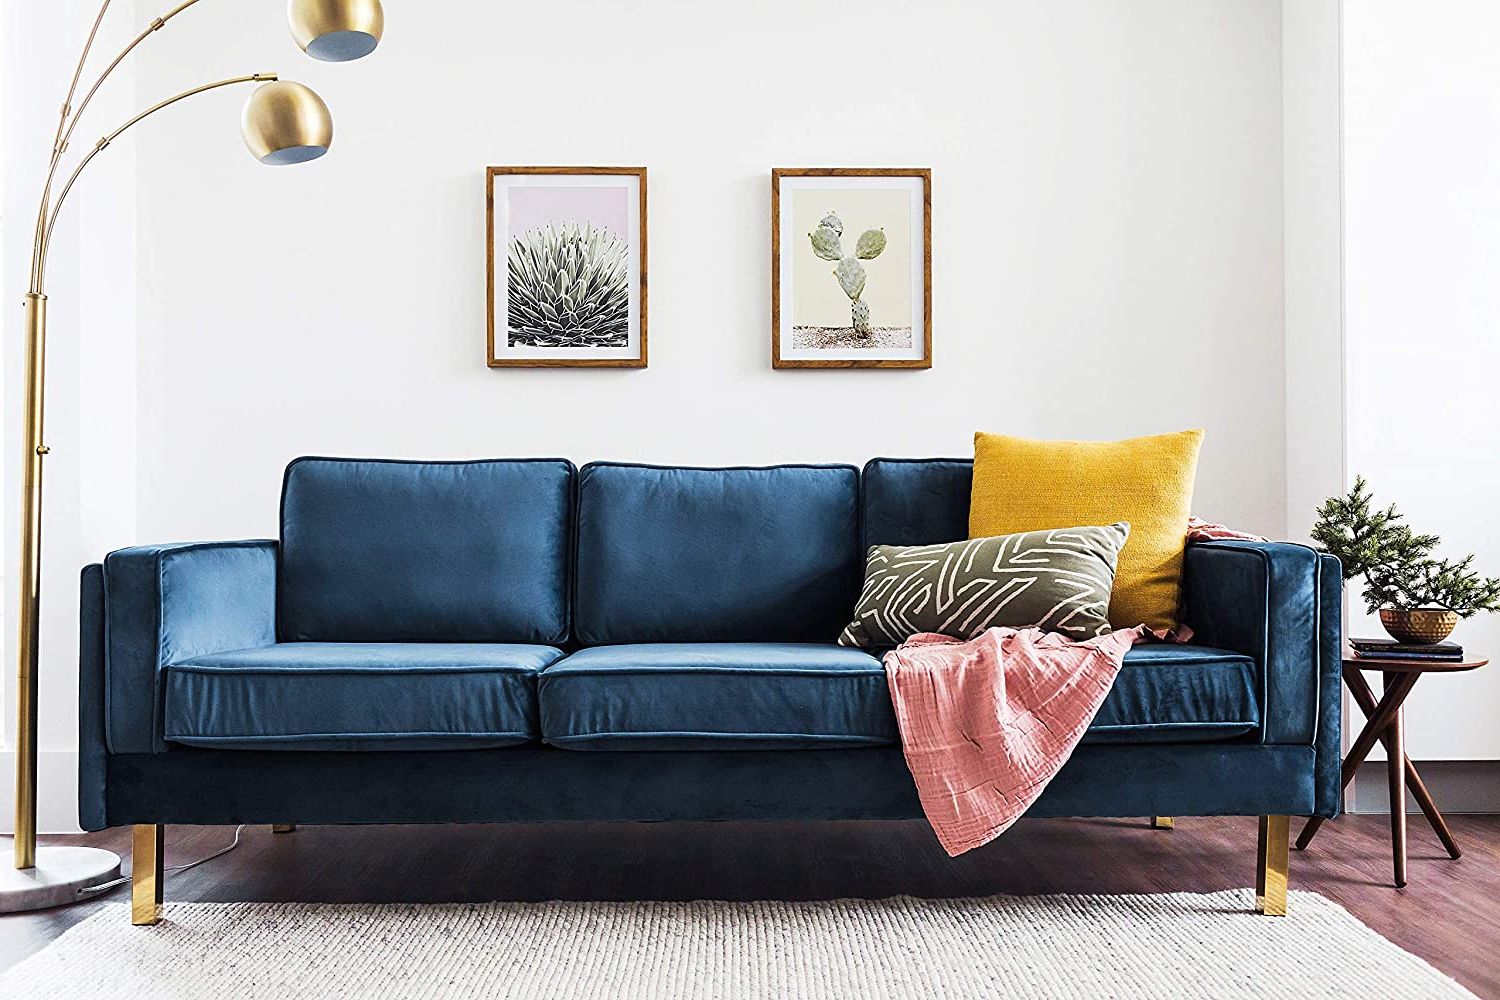 Blue Velvet Sofas With Creative Living Room Decor Ideas Throughout Sofas In Blue (Gallery 7 of 20)